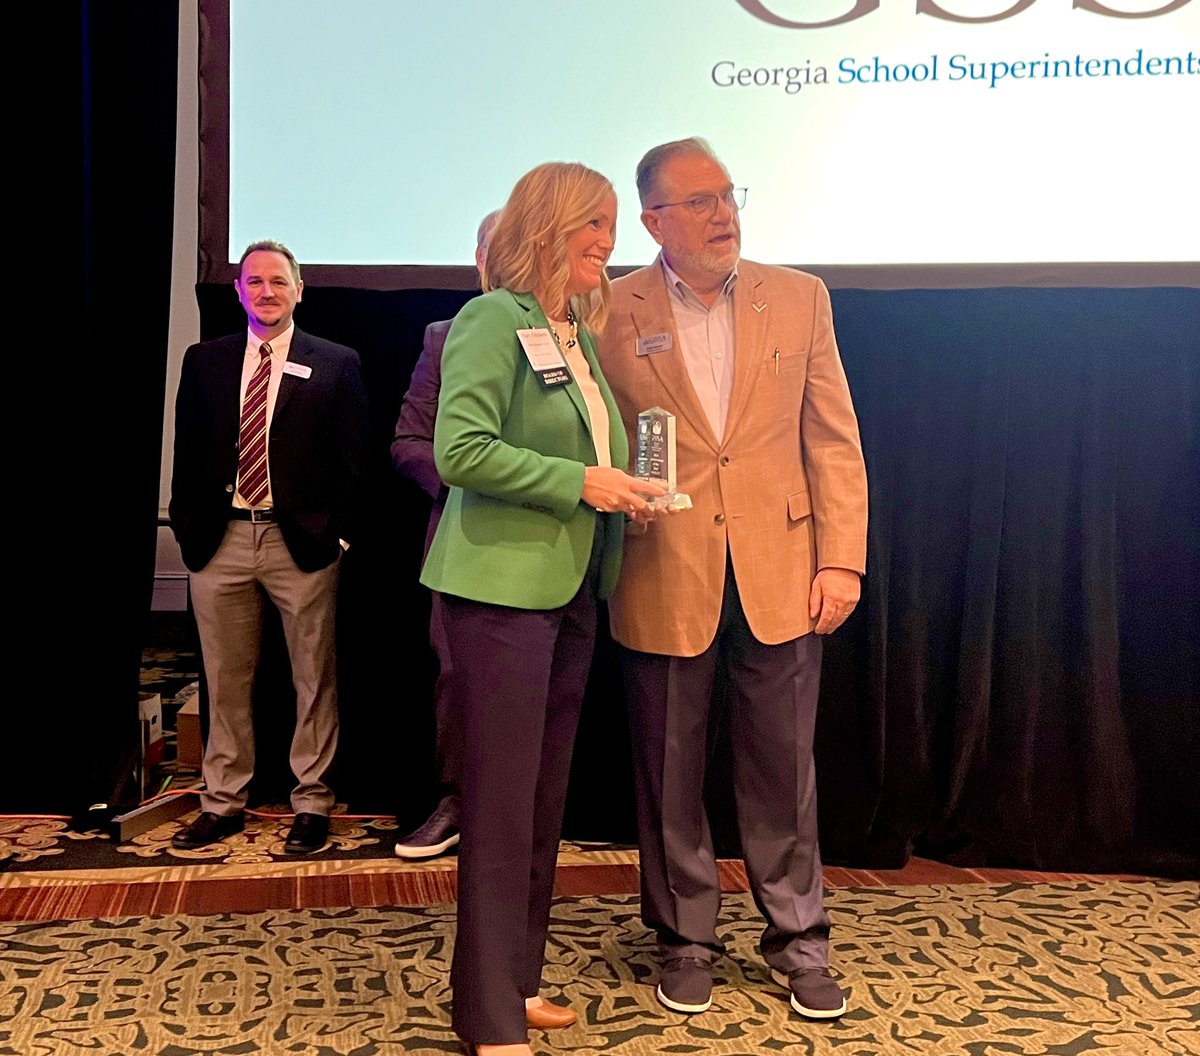 Great news! Our very own @LearnInHenry has been named one of four finalists for Georgia State Superintendent of the Year! #HenryProud @HenryCountyBOE